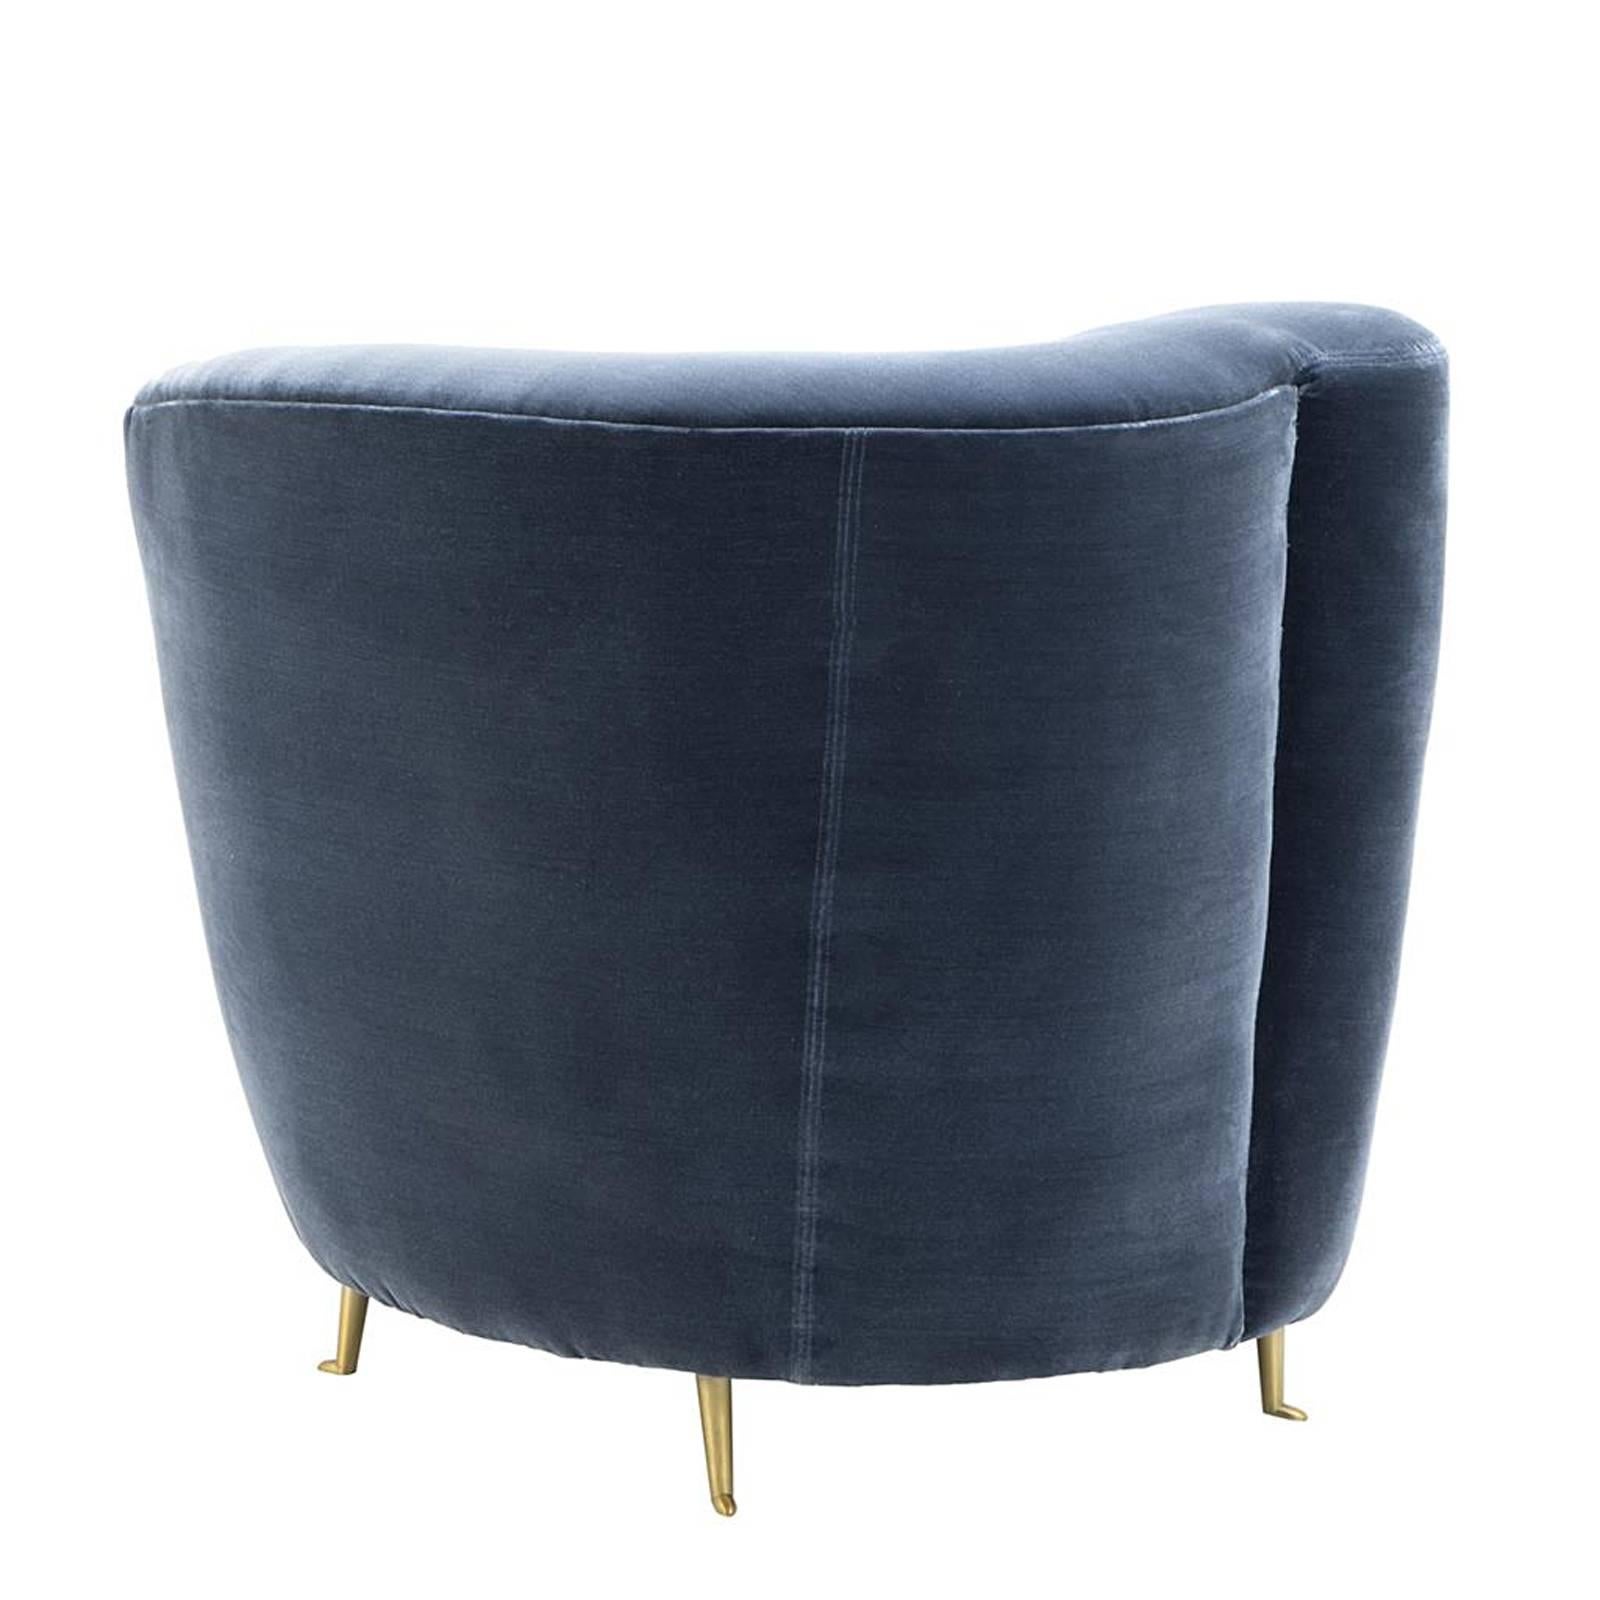 Armchair lounge faded blue upholstered with
velvet, structure in solid wood with brass legs.
Fire retardant treated velvet.
